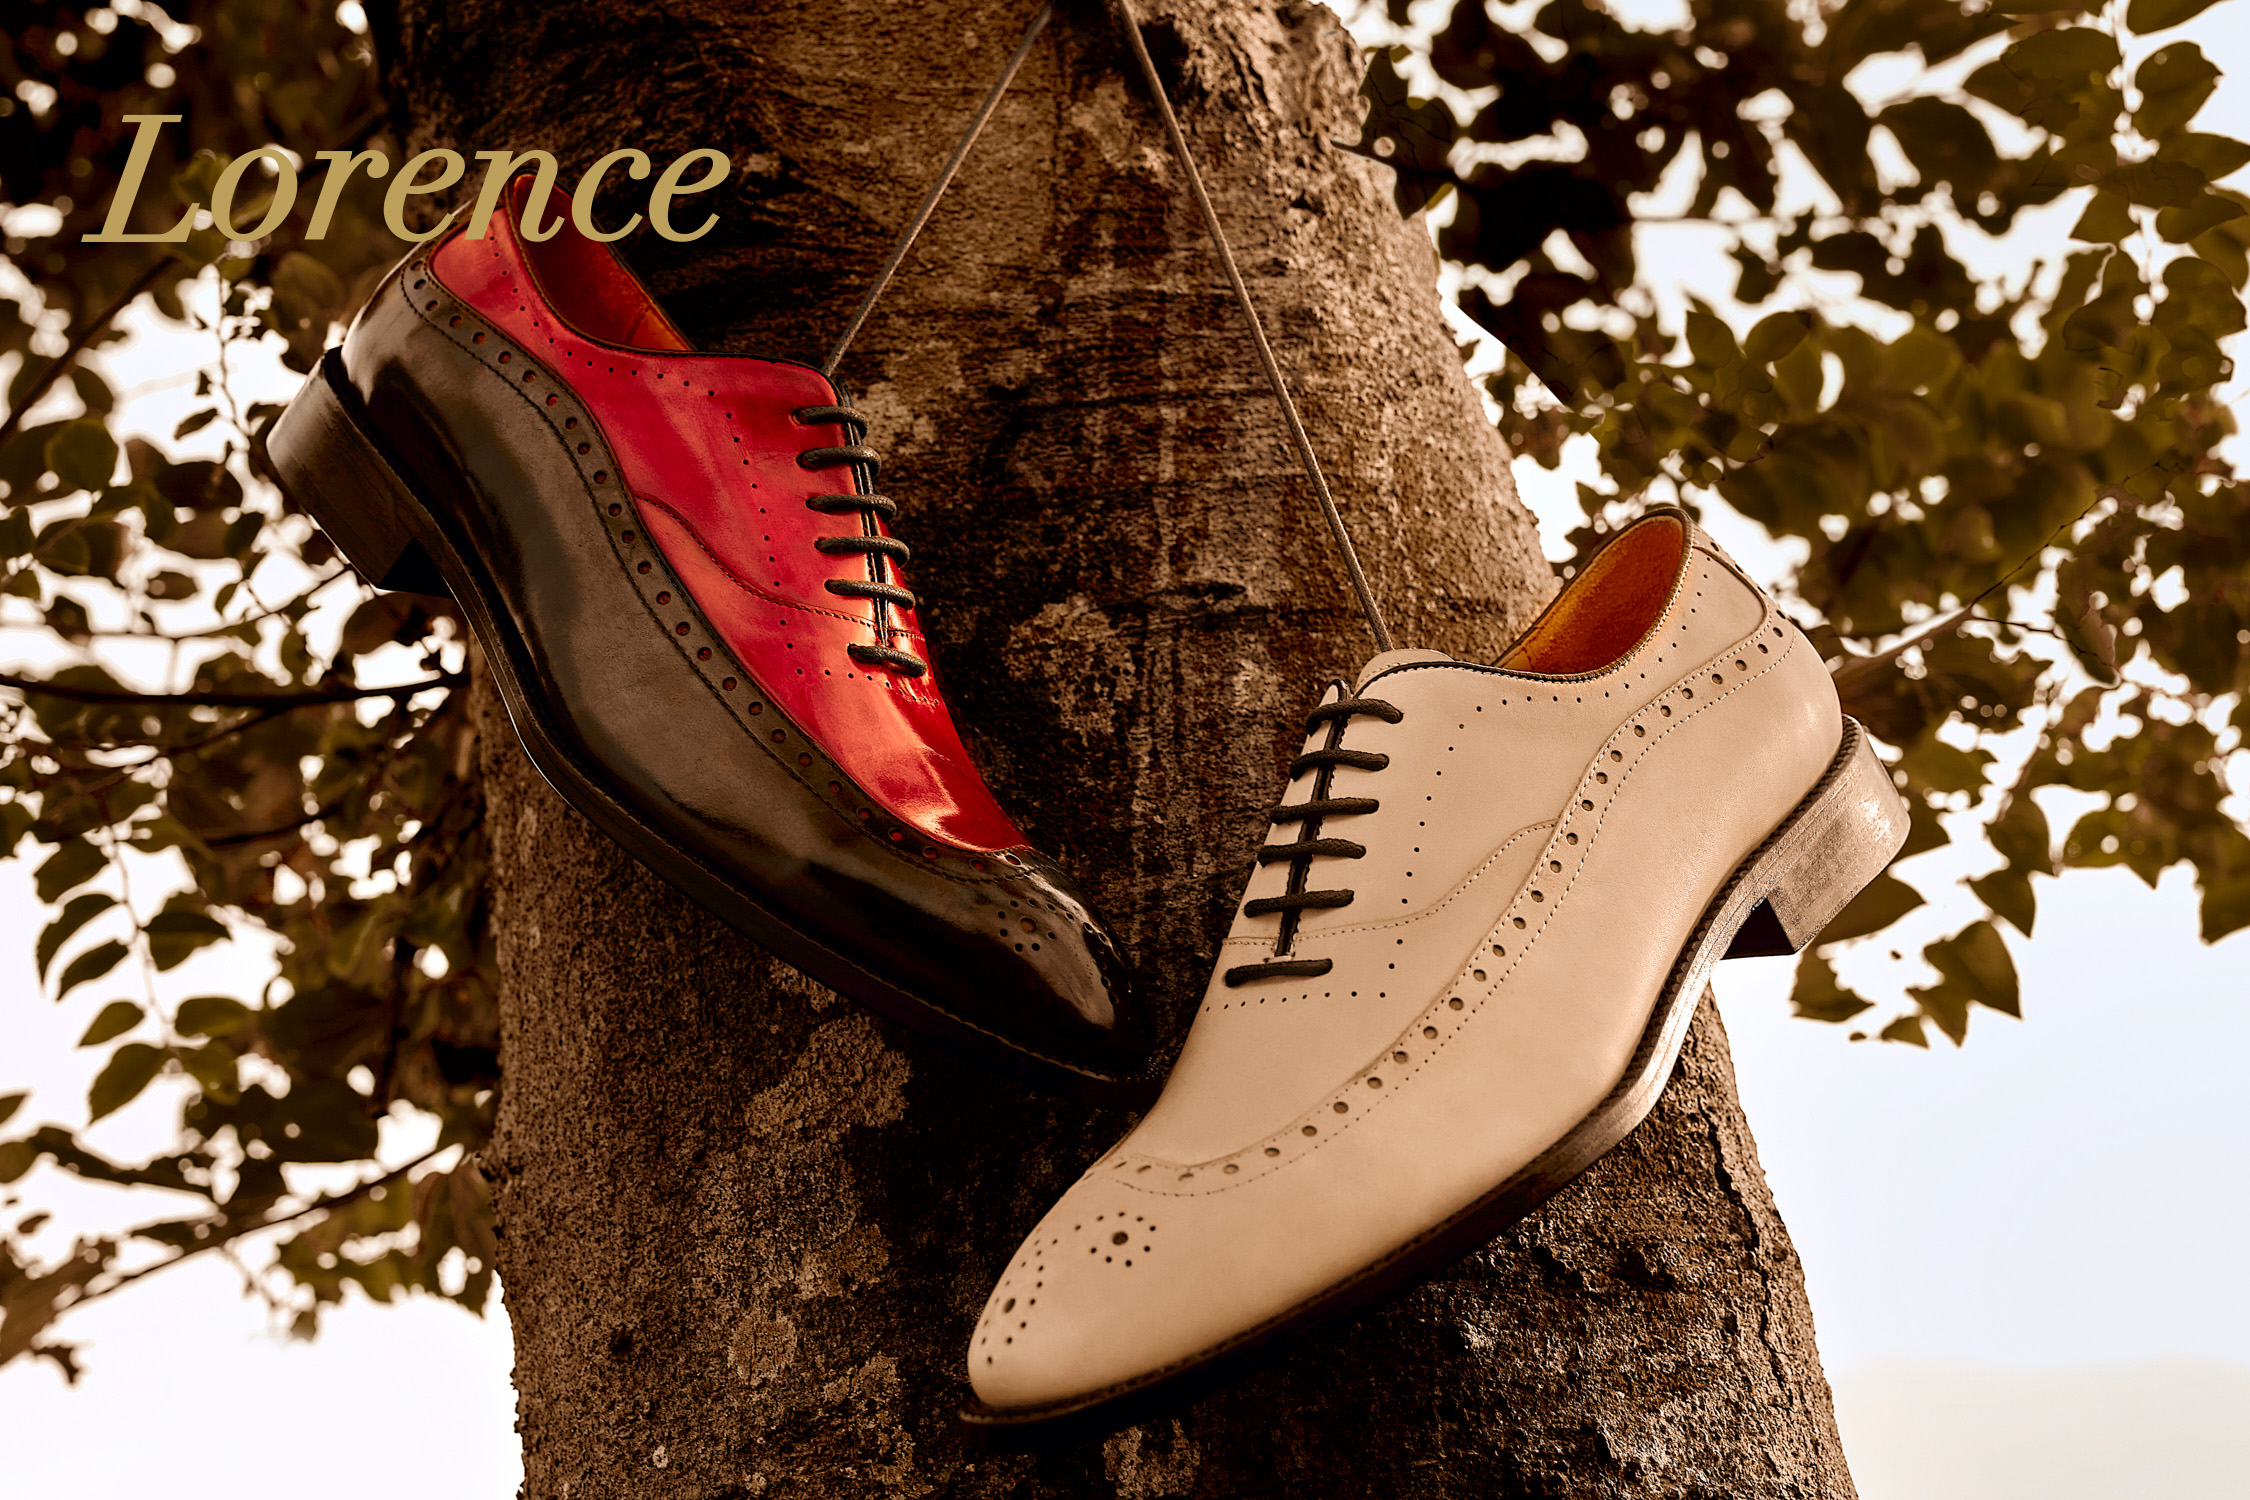 Leather Shoes Dyeing Skills in Italian Style｜ Lorence Aqua Stain